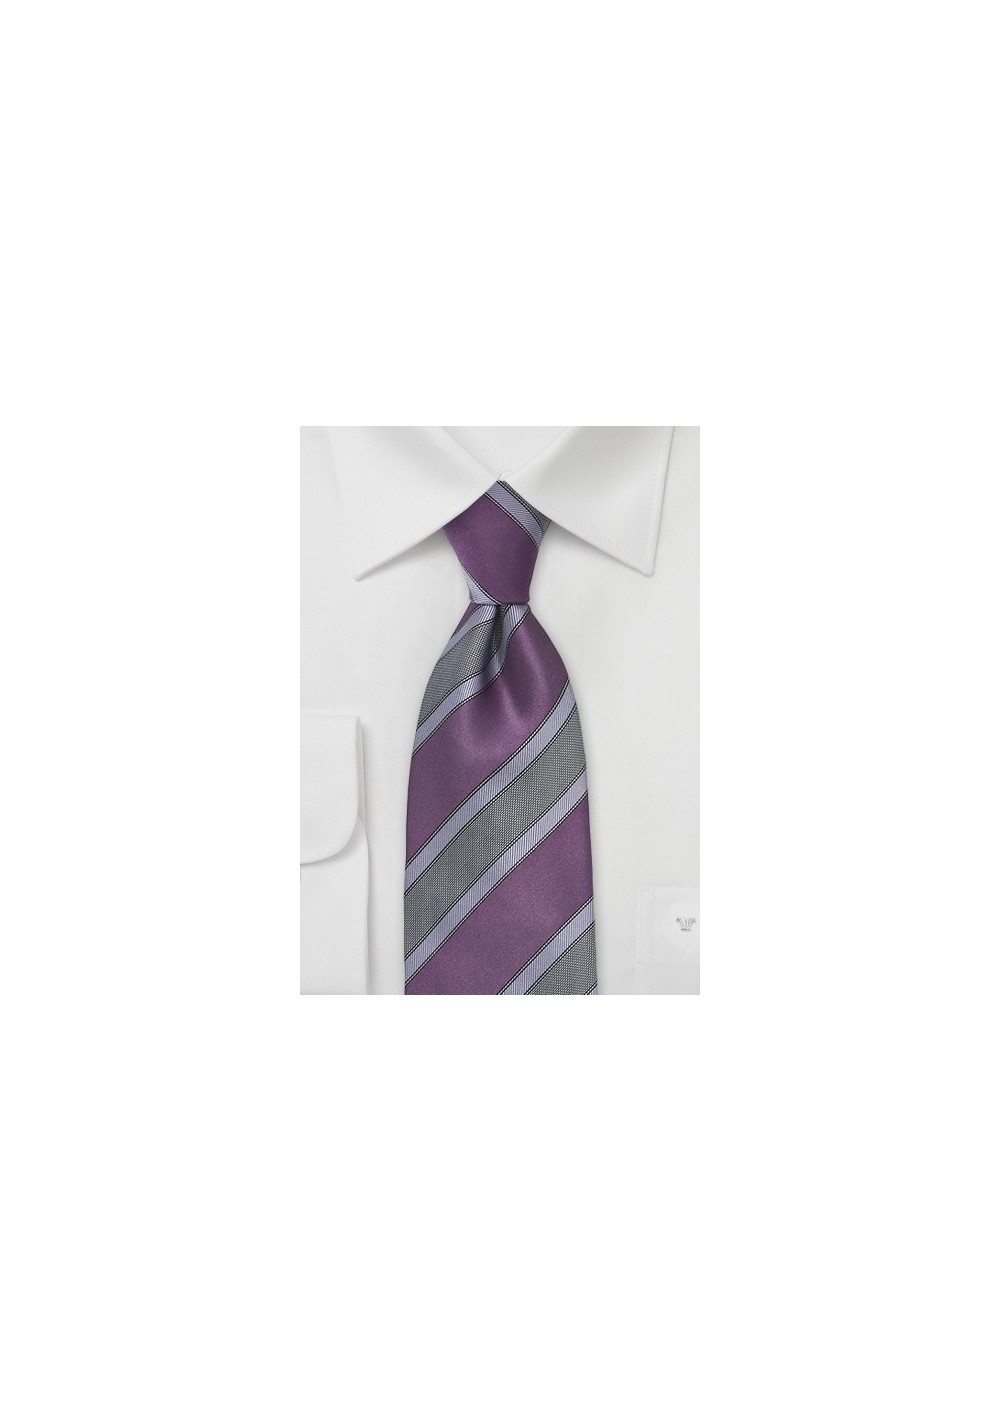 Graphic Striped Tie in Plum and Lilac